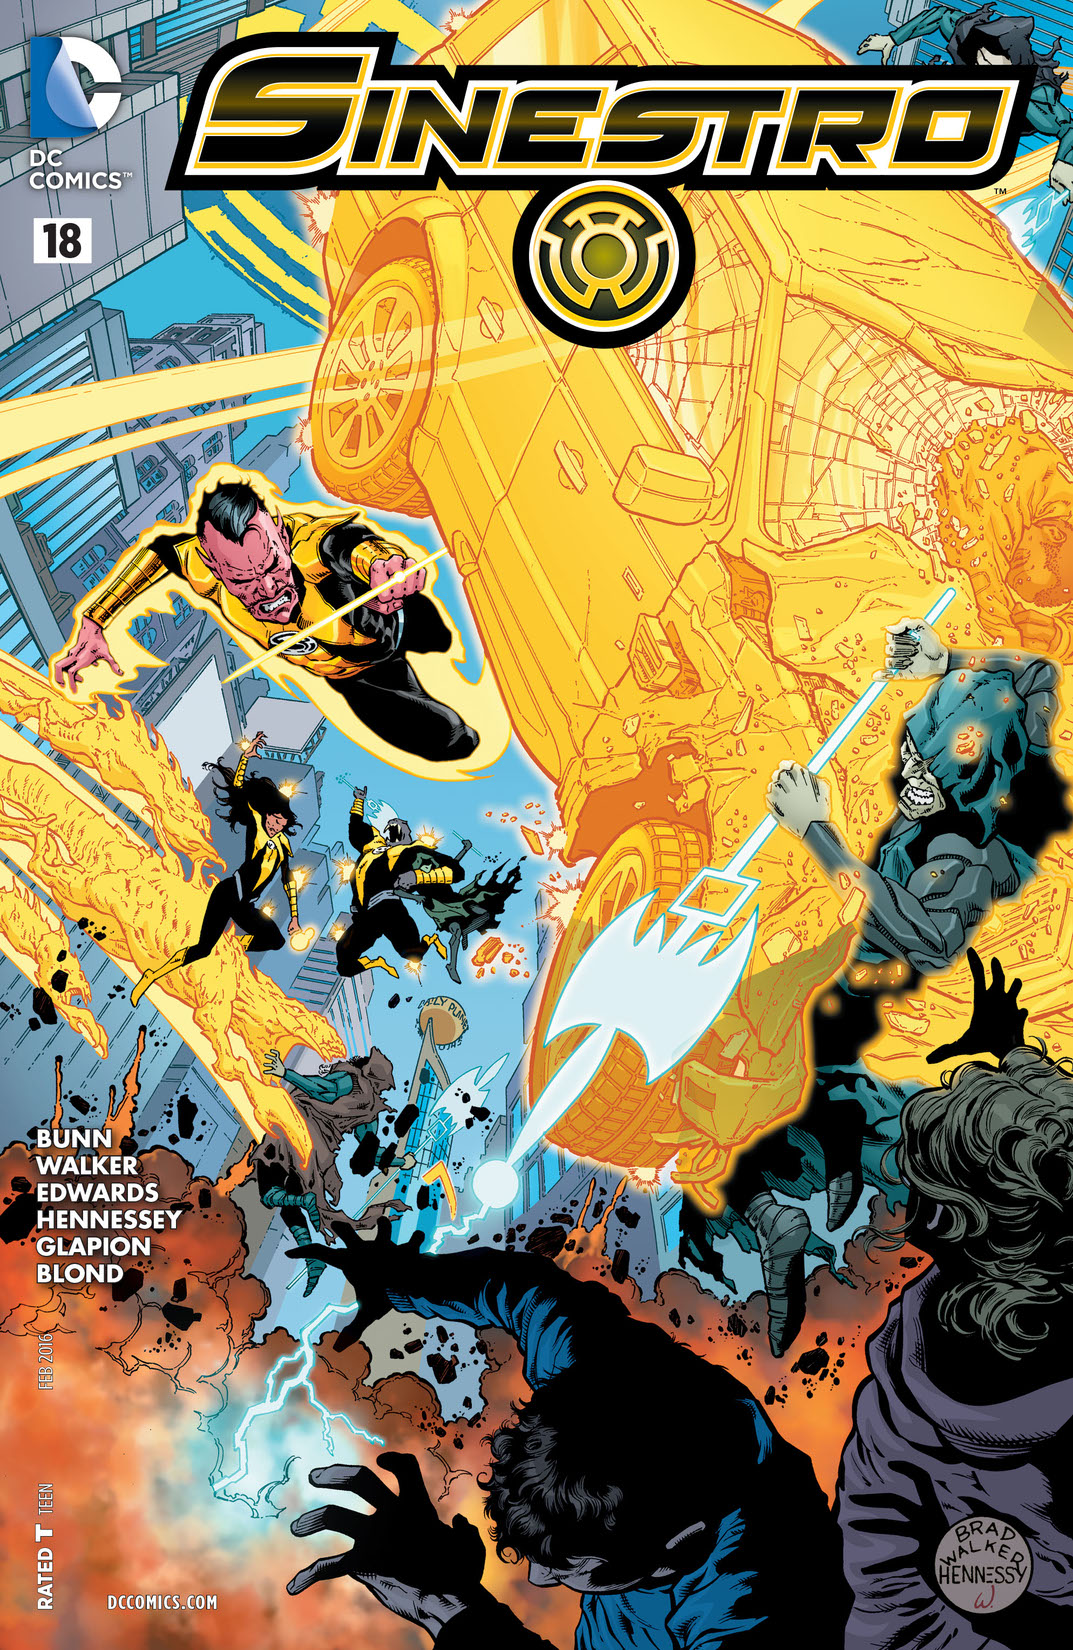 Sinestro #18 preview images